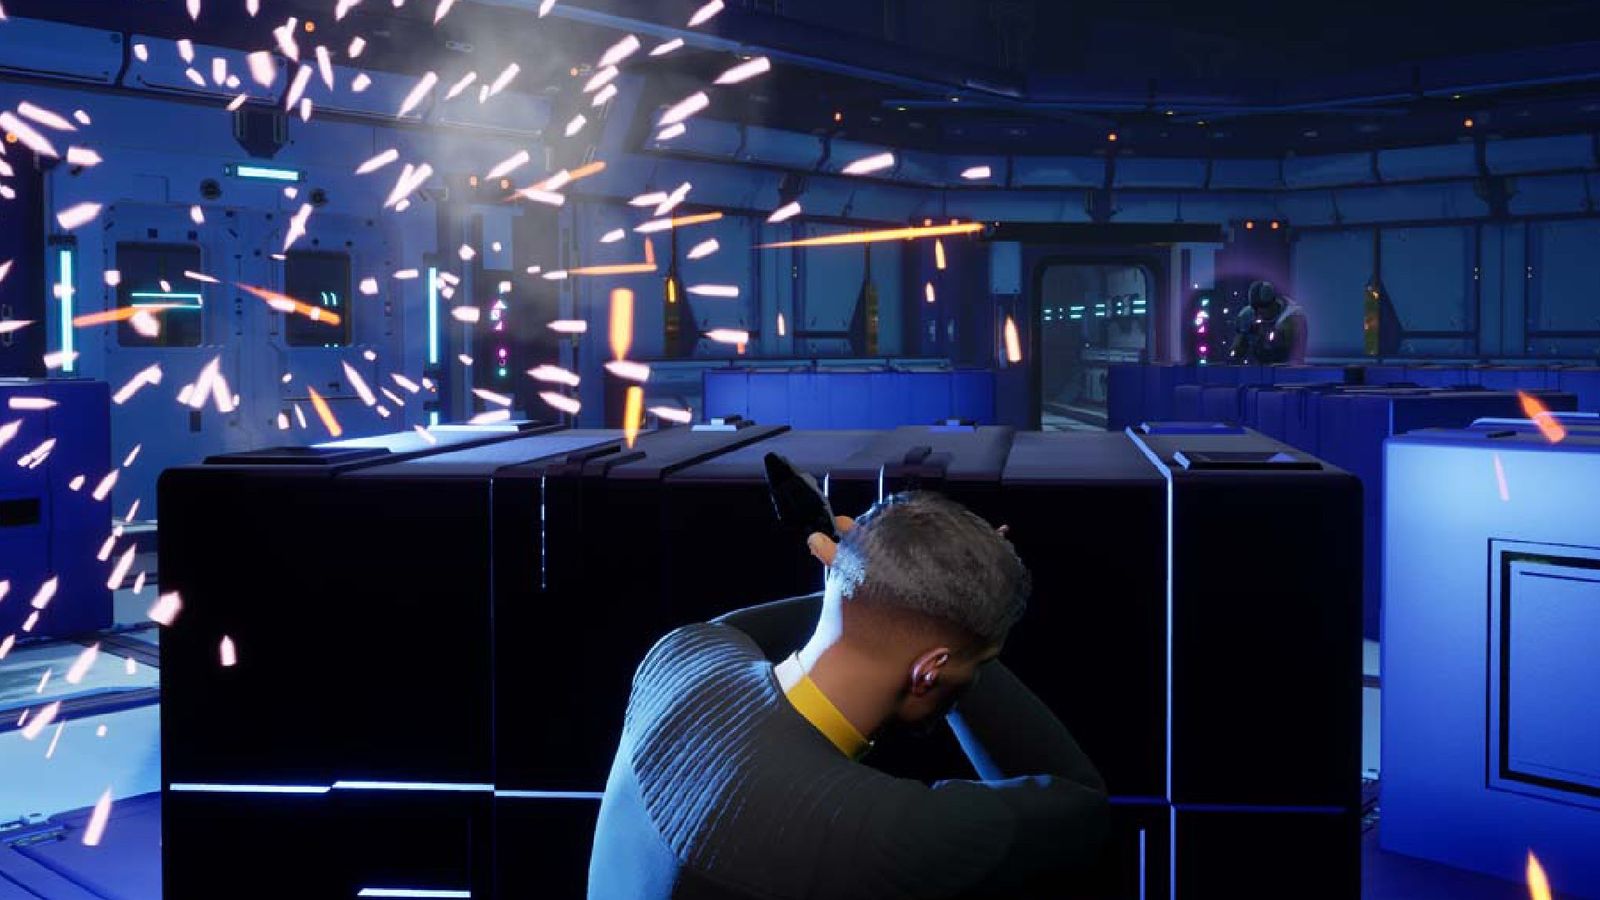 An image showing Star Trek: Resurgence combat with one starfleet officer hiding behind a crate as phaser fire commenced 